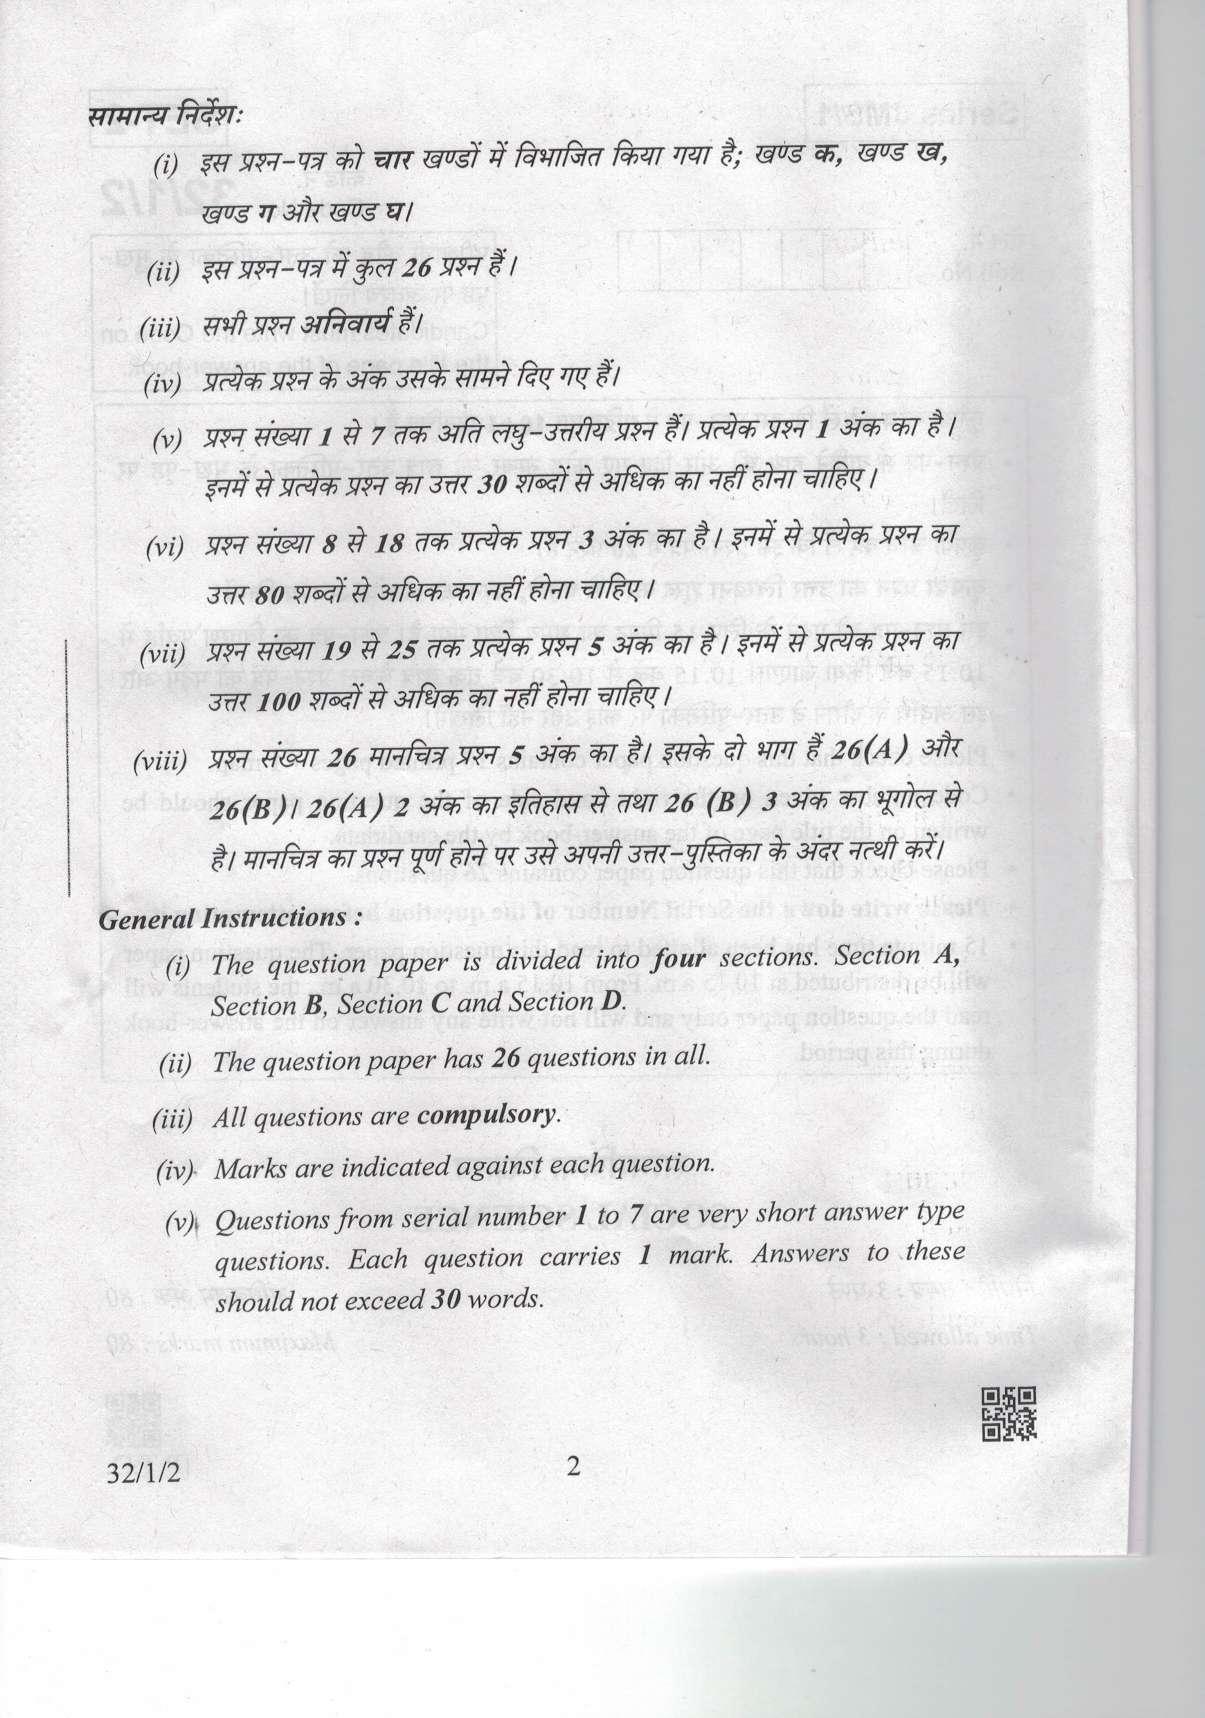 CBSE Class 10 32-1-2 Social Science 2019 Question Paper - Page 2